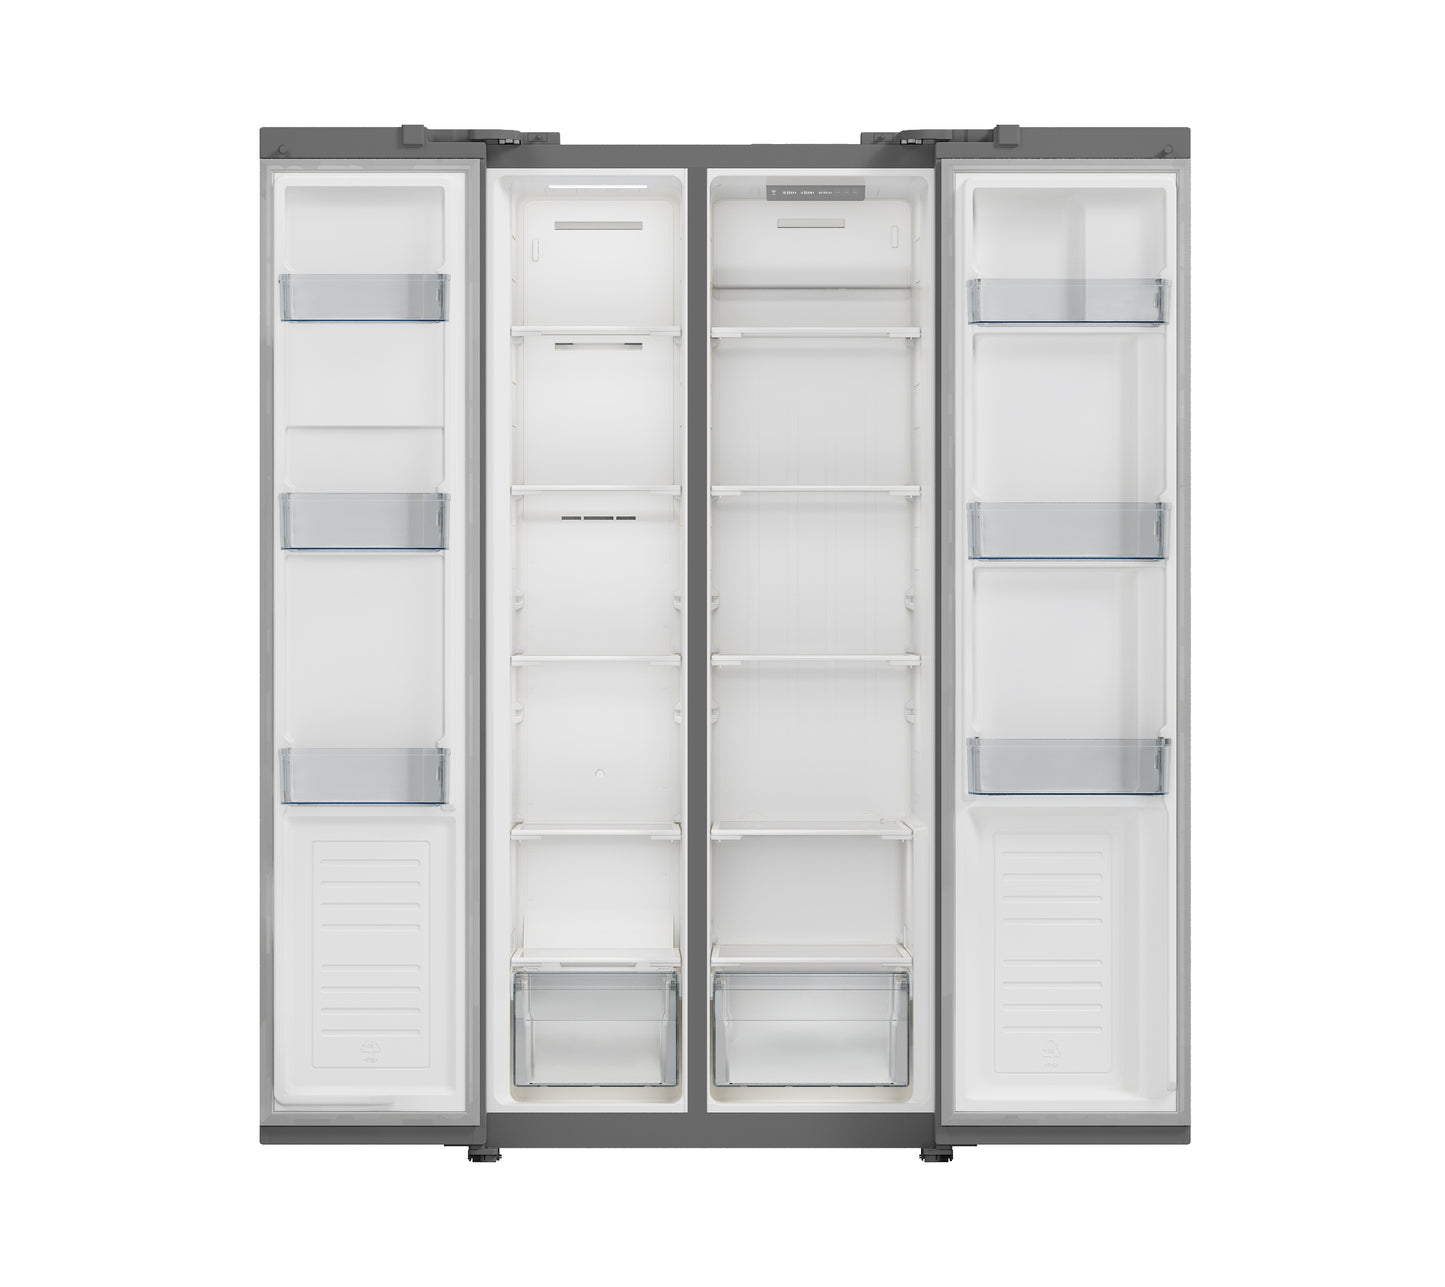 Hisense REF 55WS 436 litres Side By Side Refrigerator